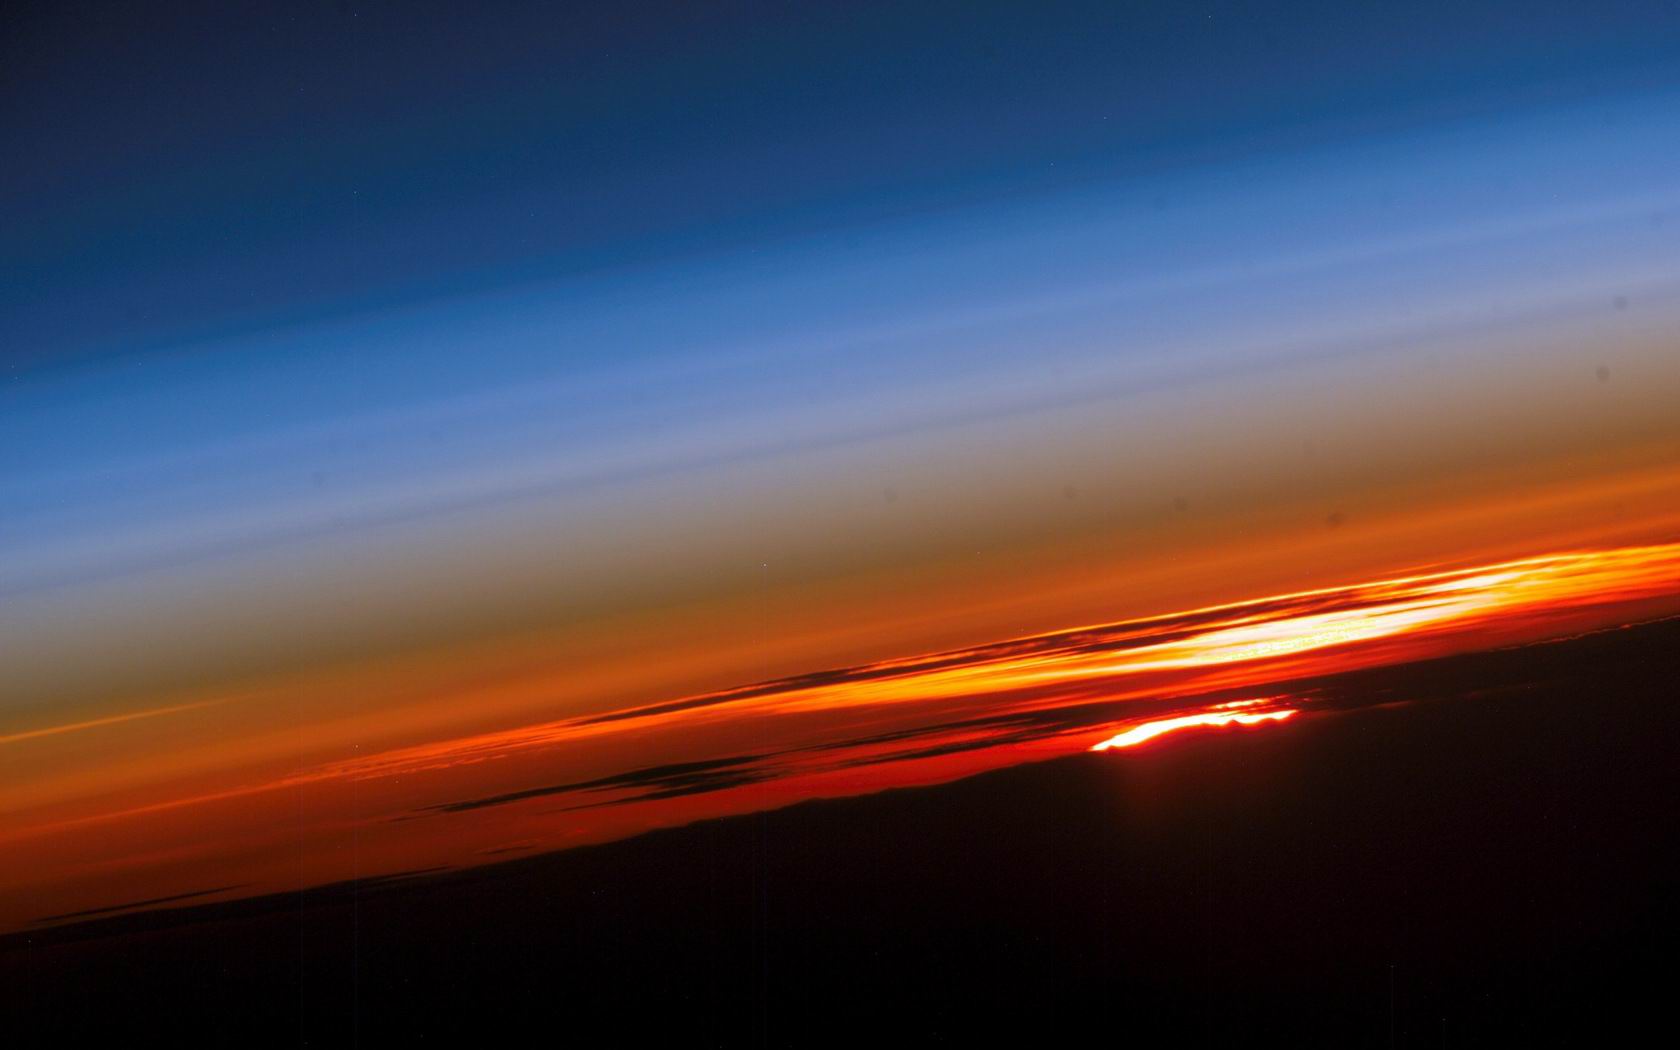 Hq Sunset Seen From International Space Station